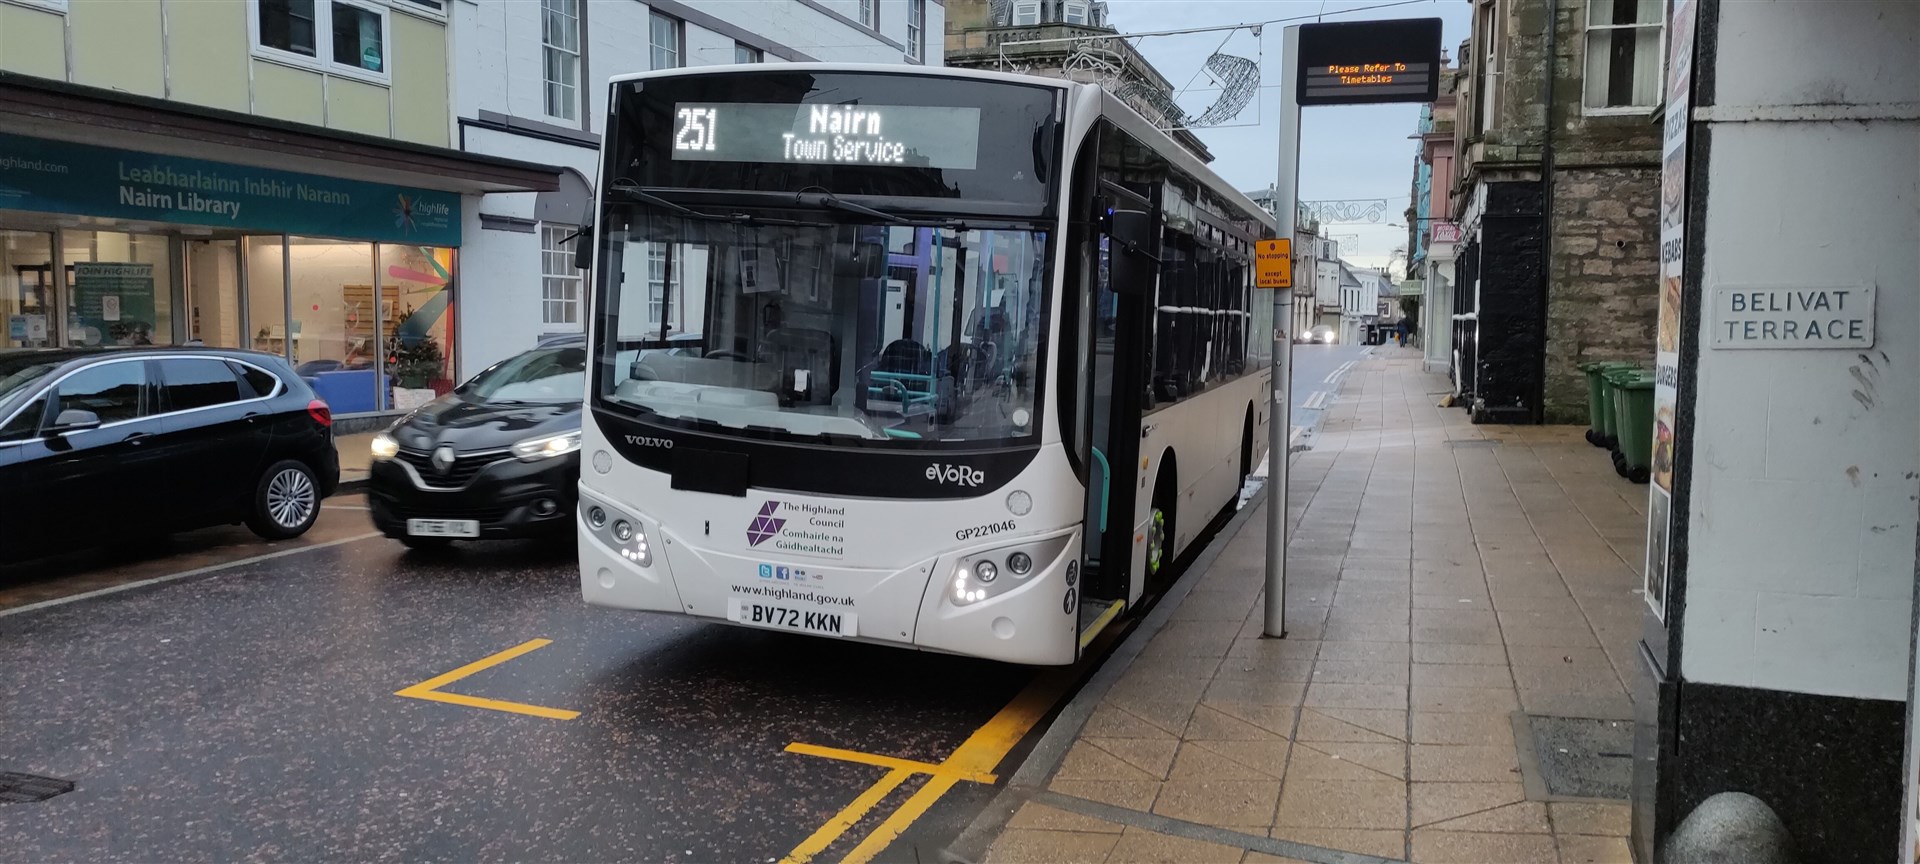 Highland Council began an in-house pilot project running its own bus service last year.